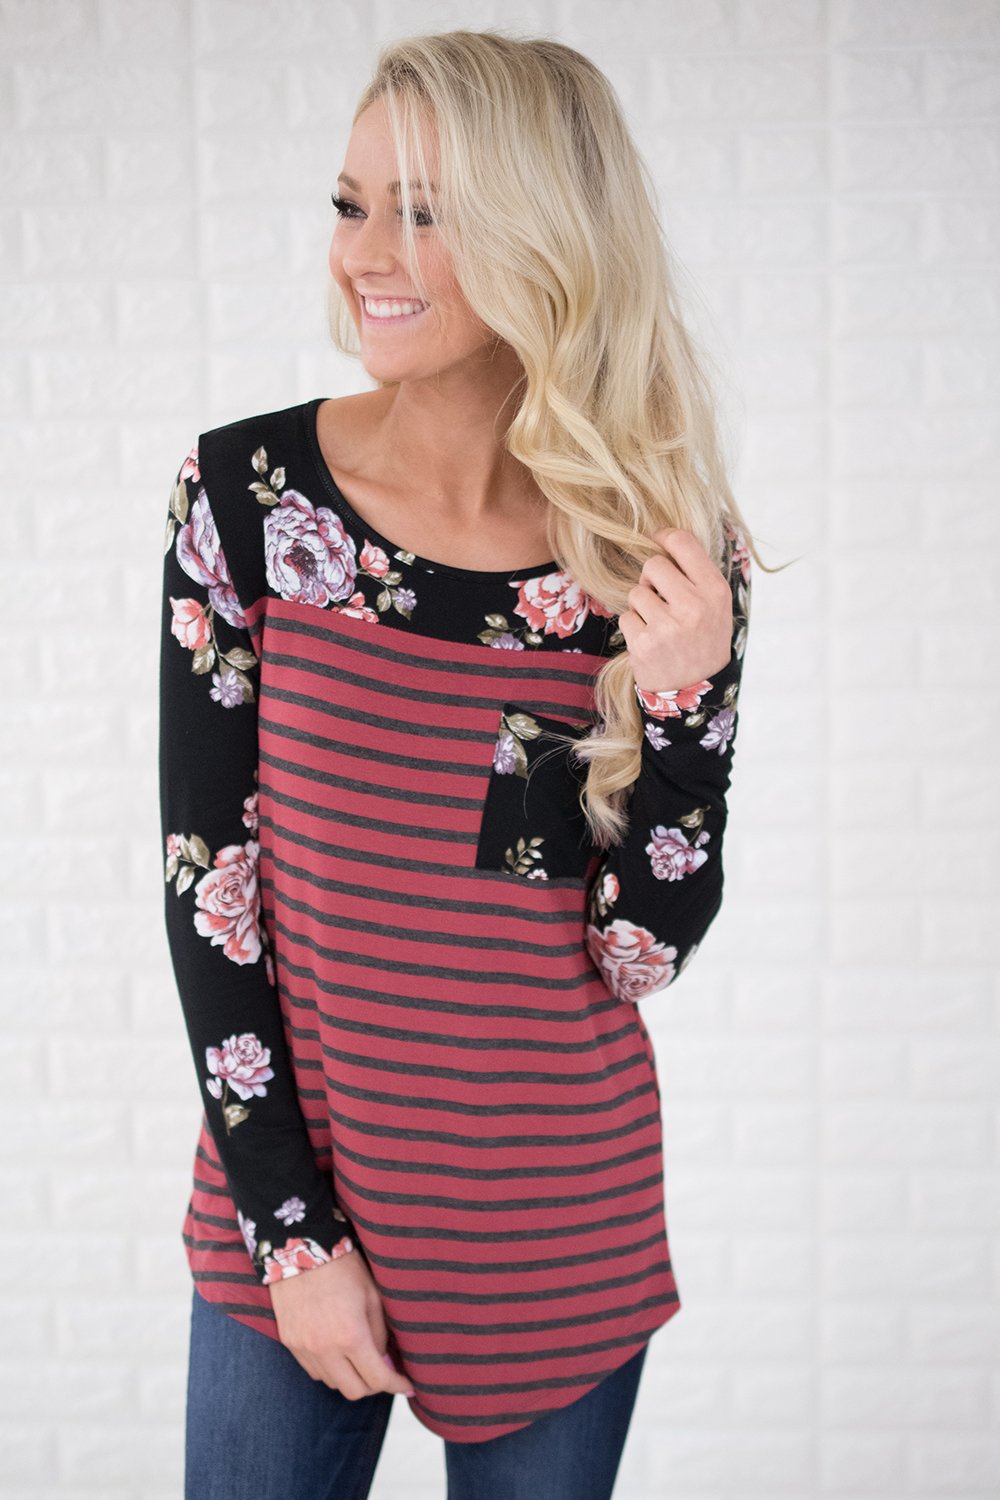 Can't Keep My Eyes Off You Floral & Stripes Top